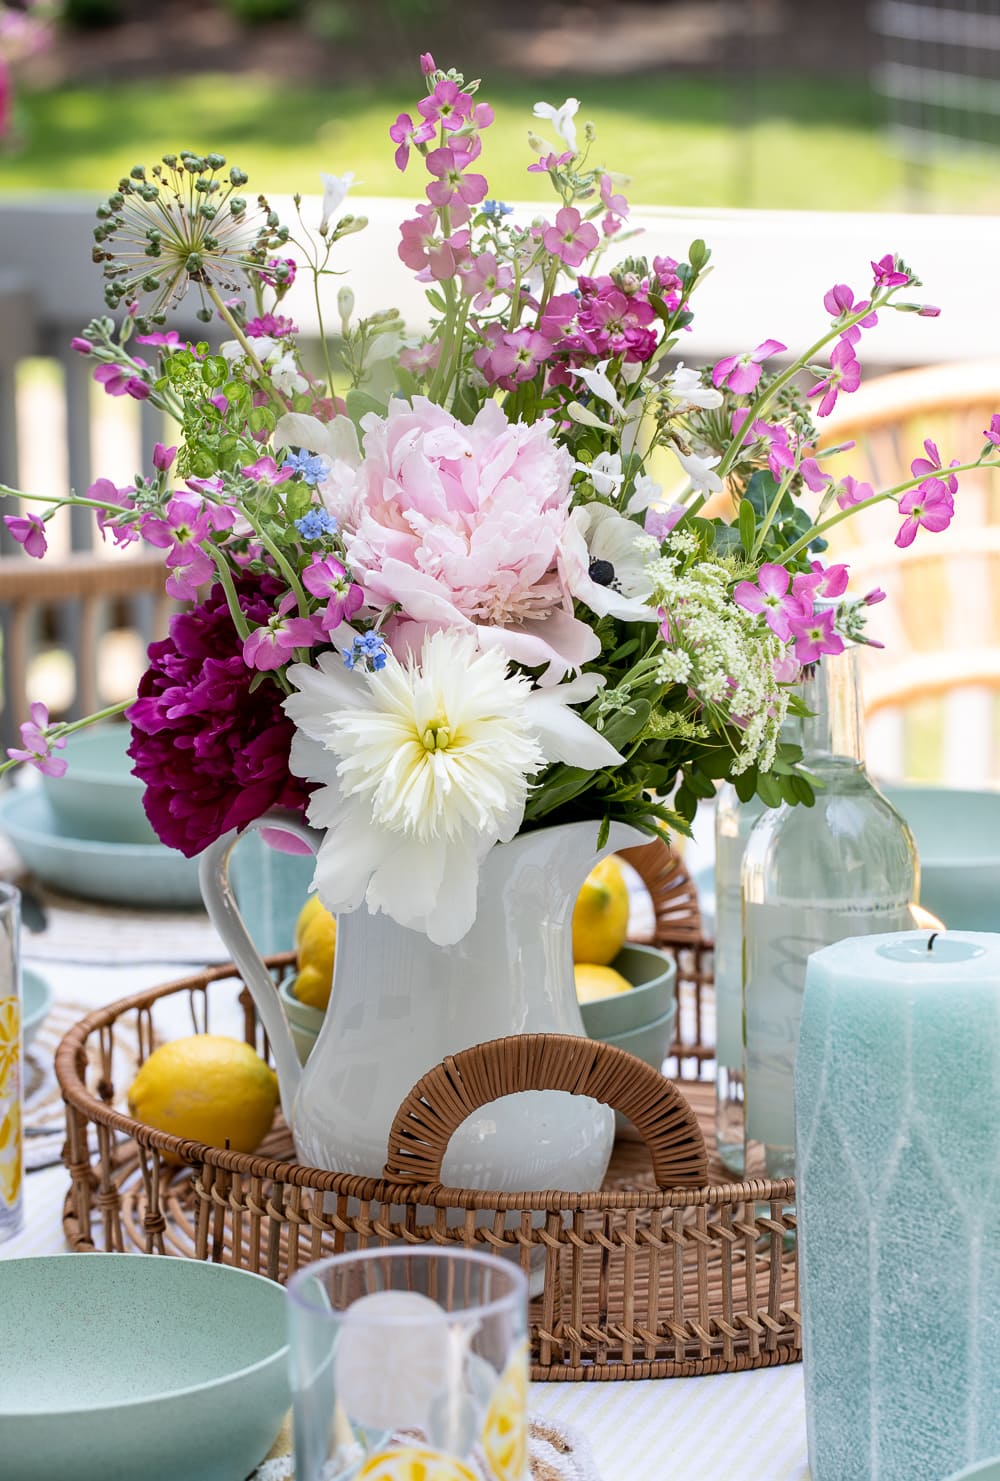 peony flower arrangement on outdoor table setting.